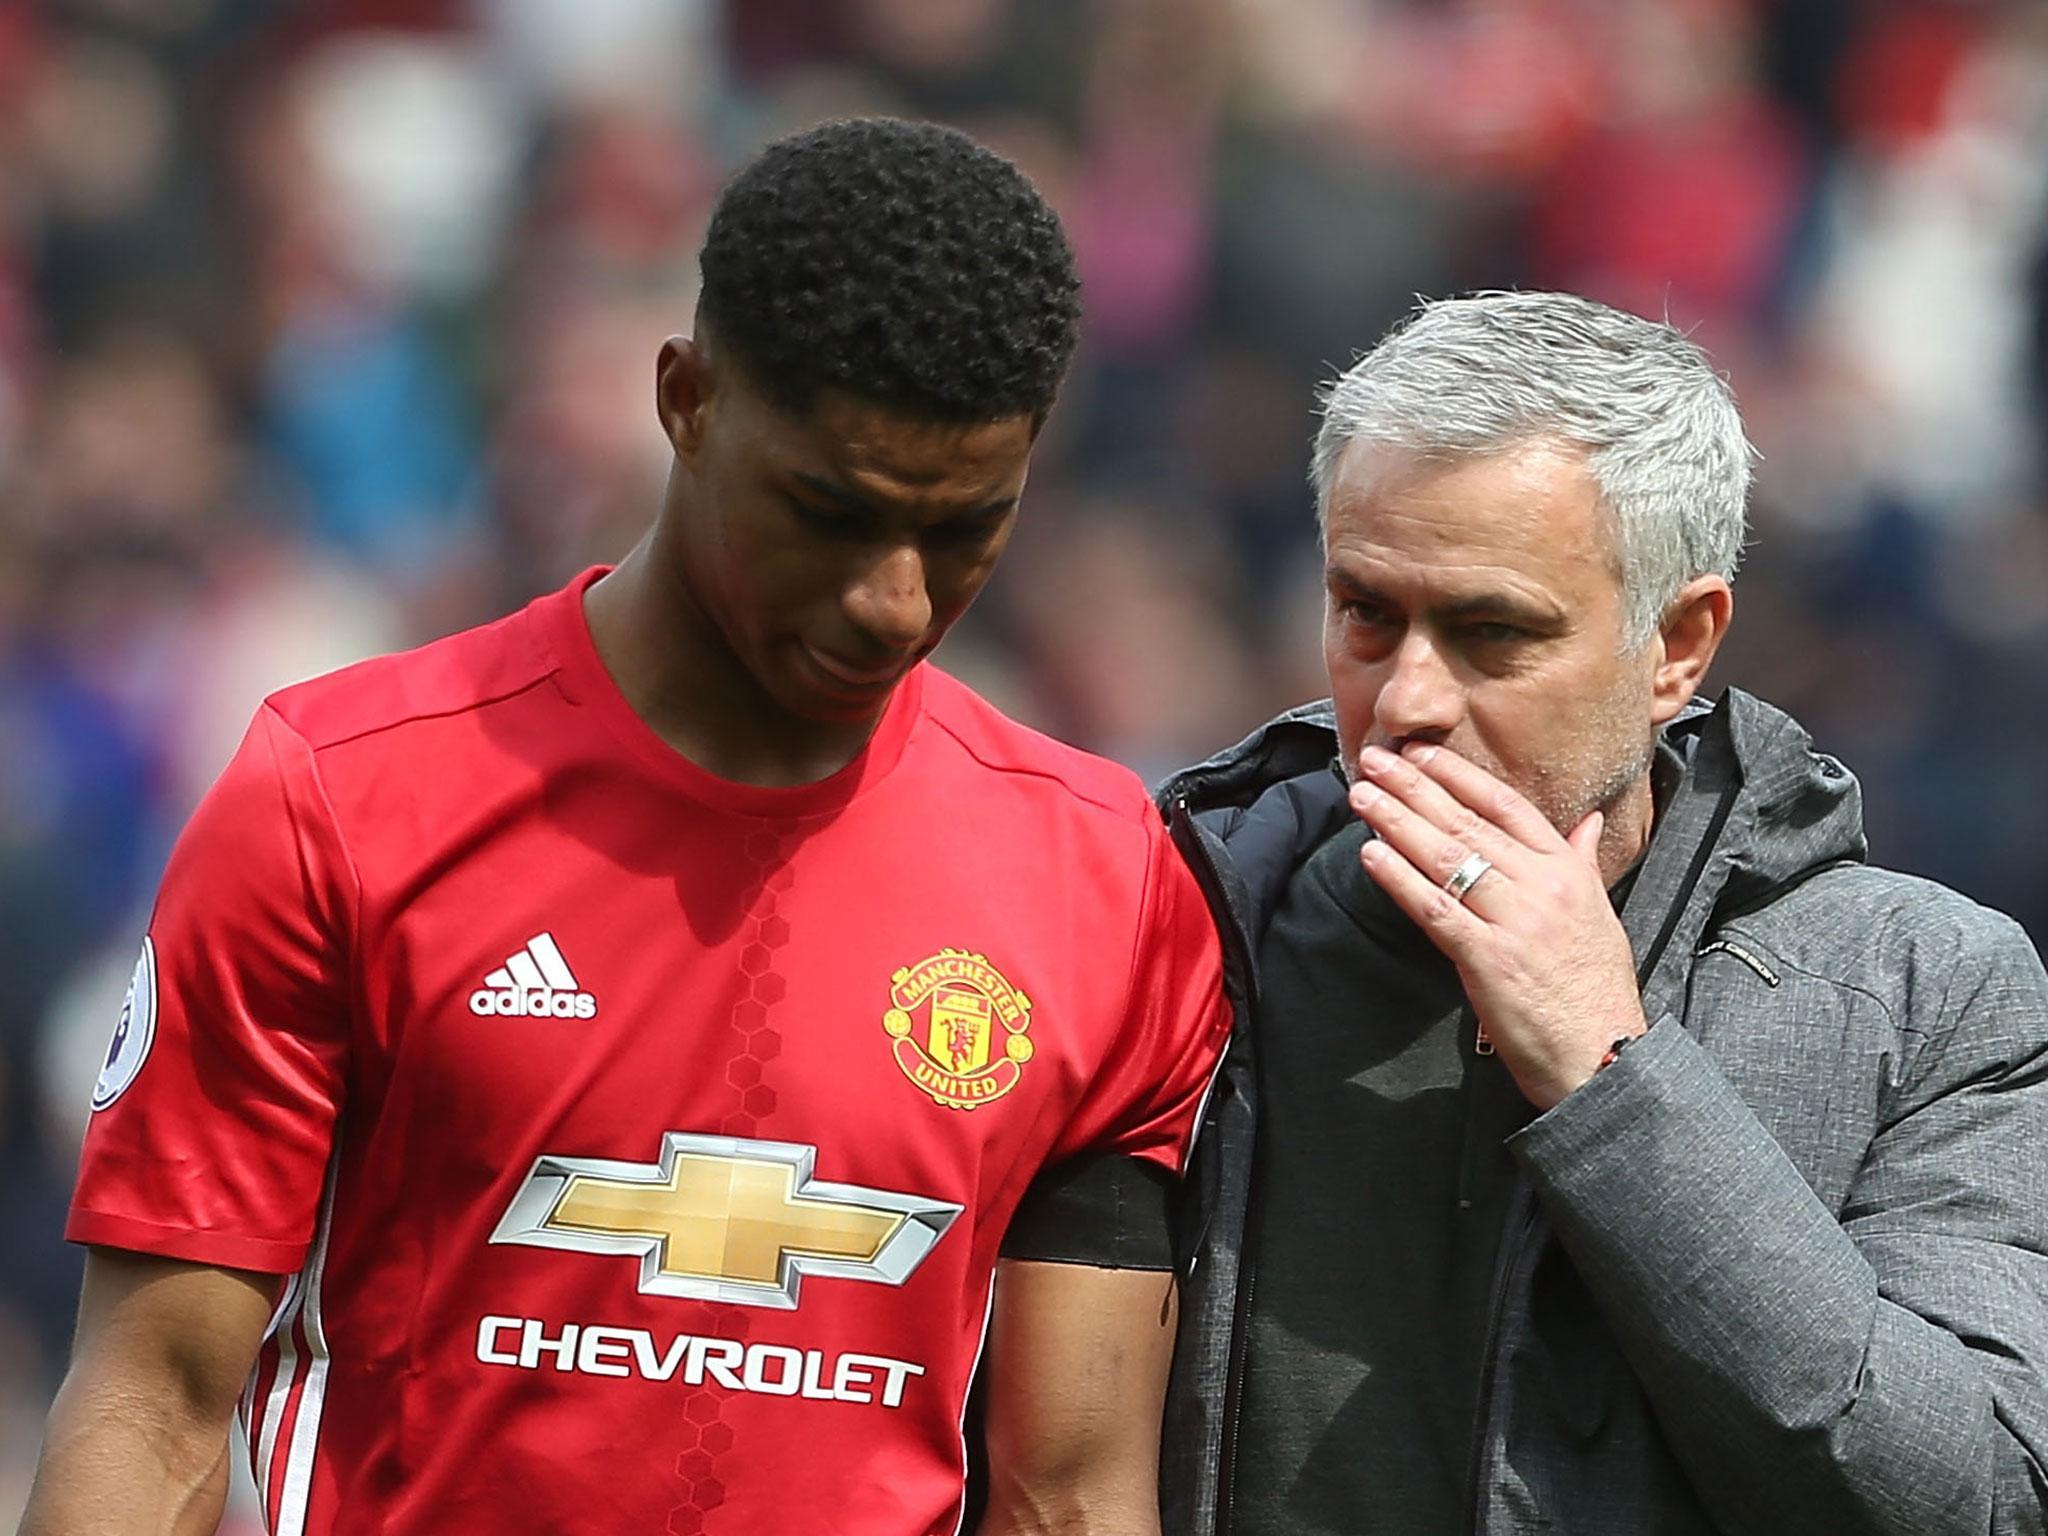 Marcus Rashford has come under fire for his actions in the run-up to United's first goal against Swansea